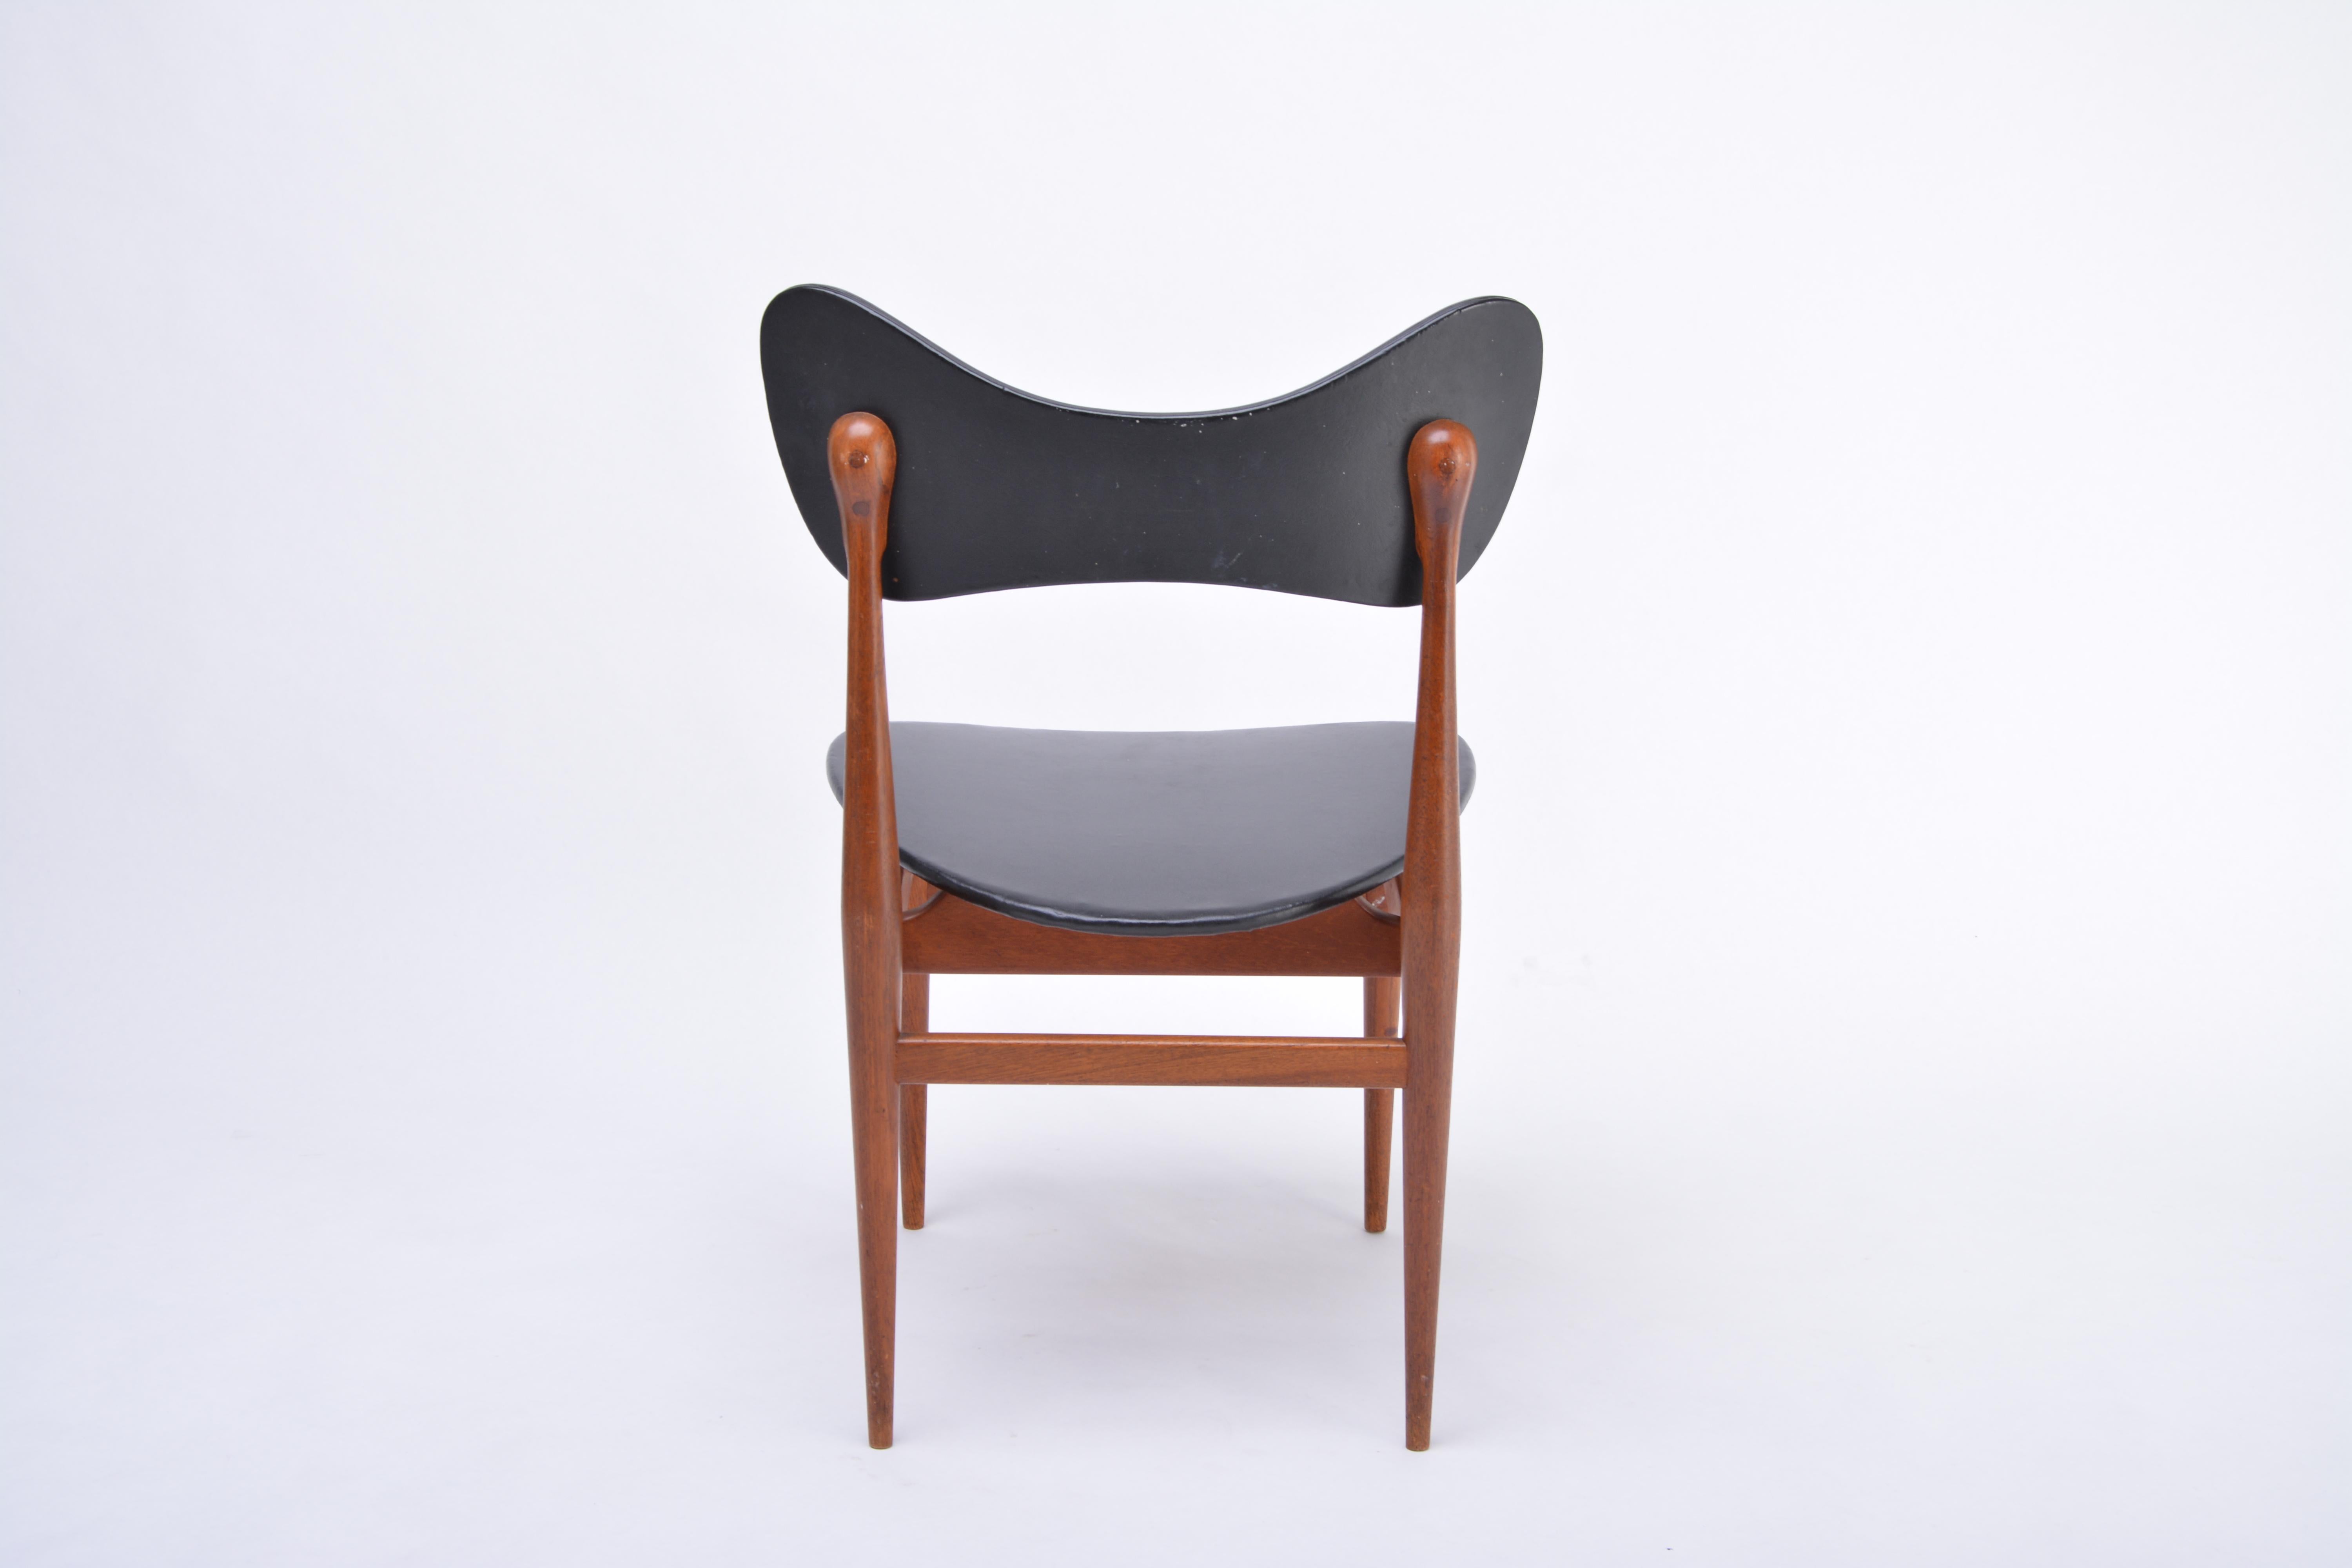 20th Century Rare Mid-Century Modern Butterfly chair by Inge & Luciano Rubino, 1963 For Sale